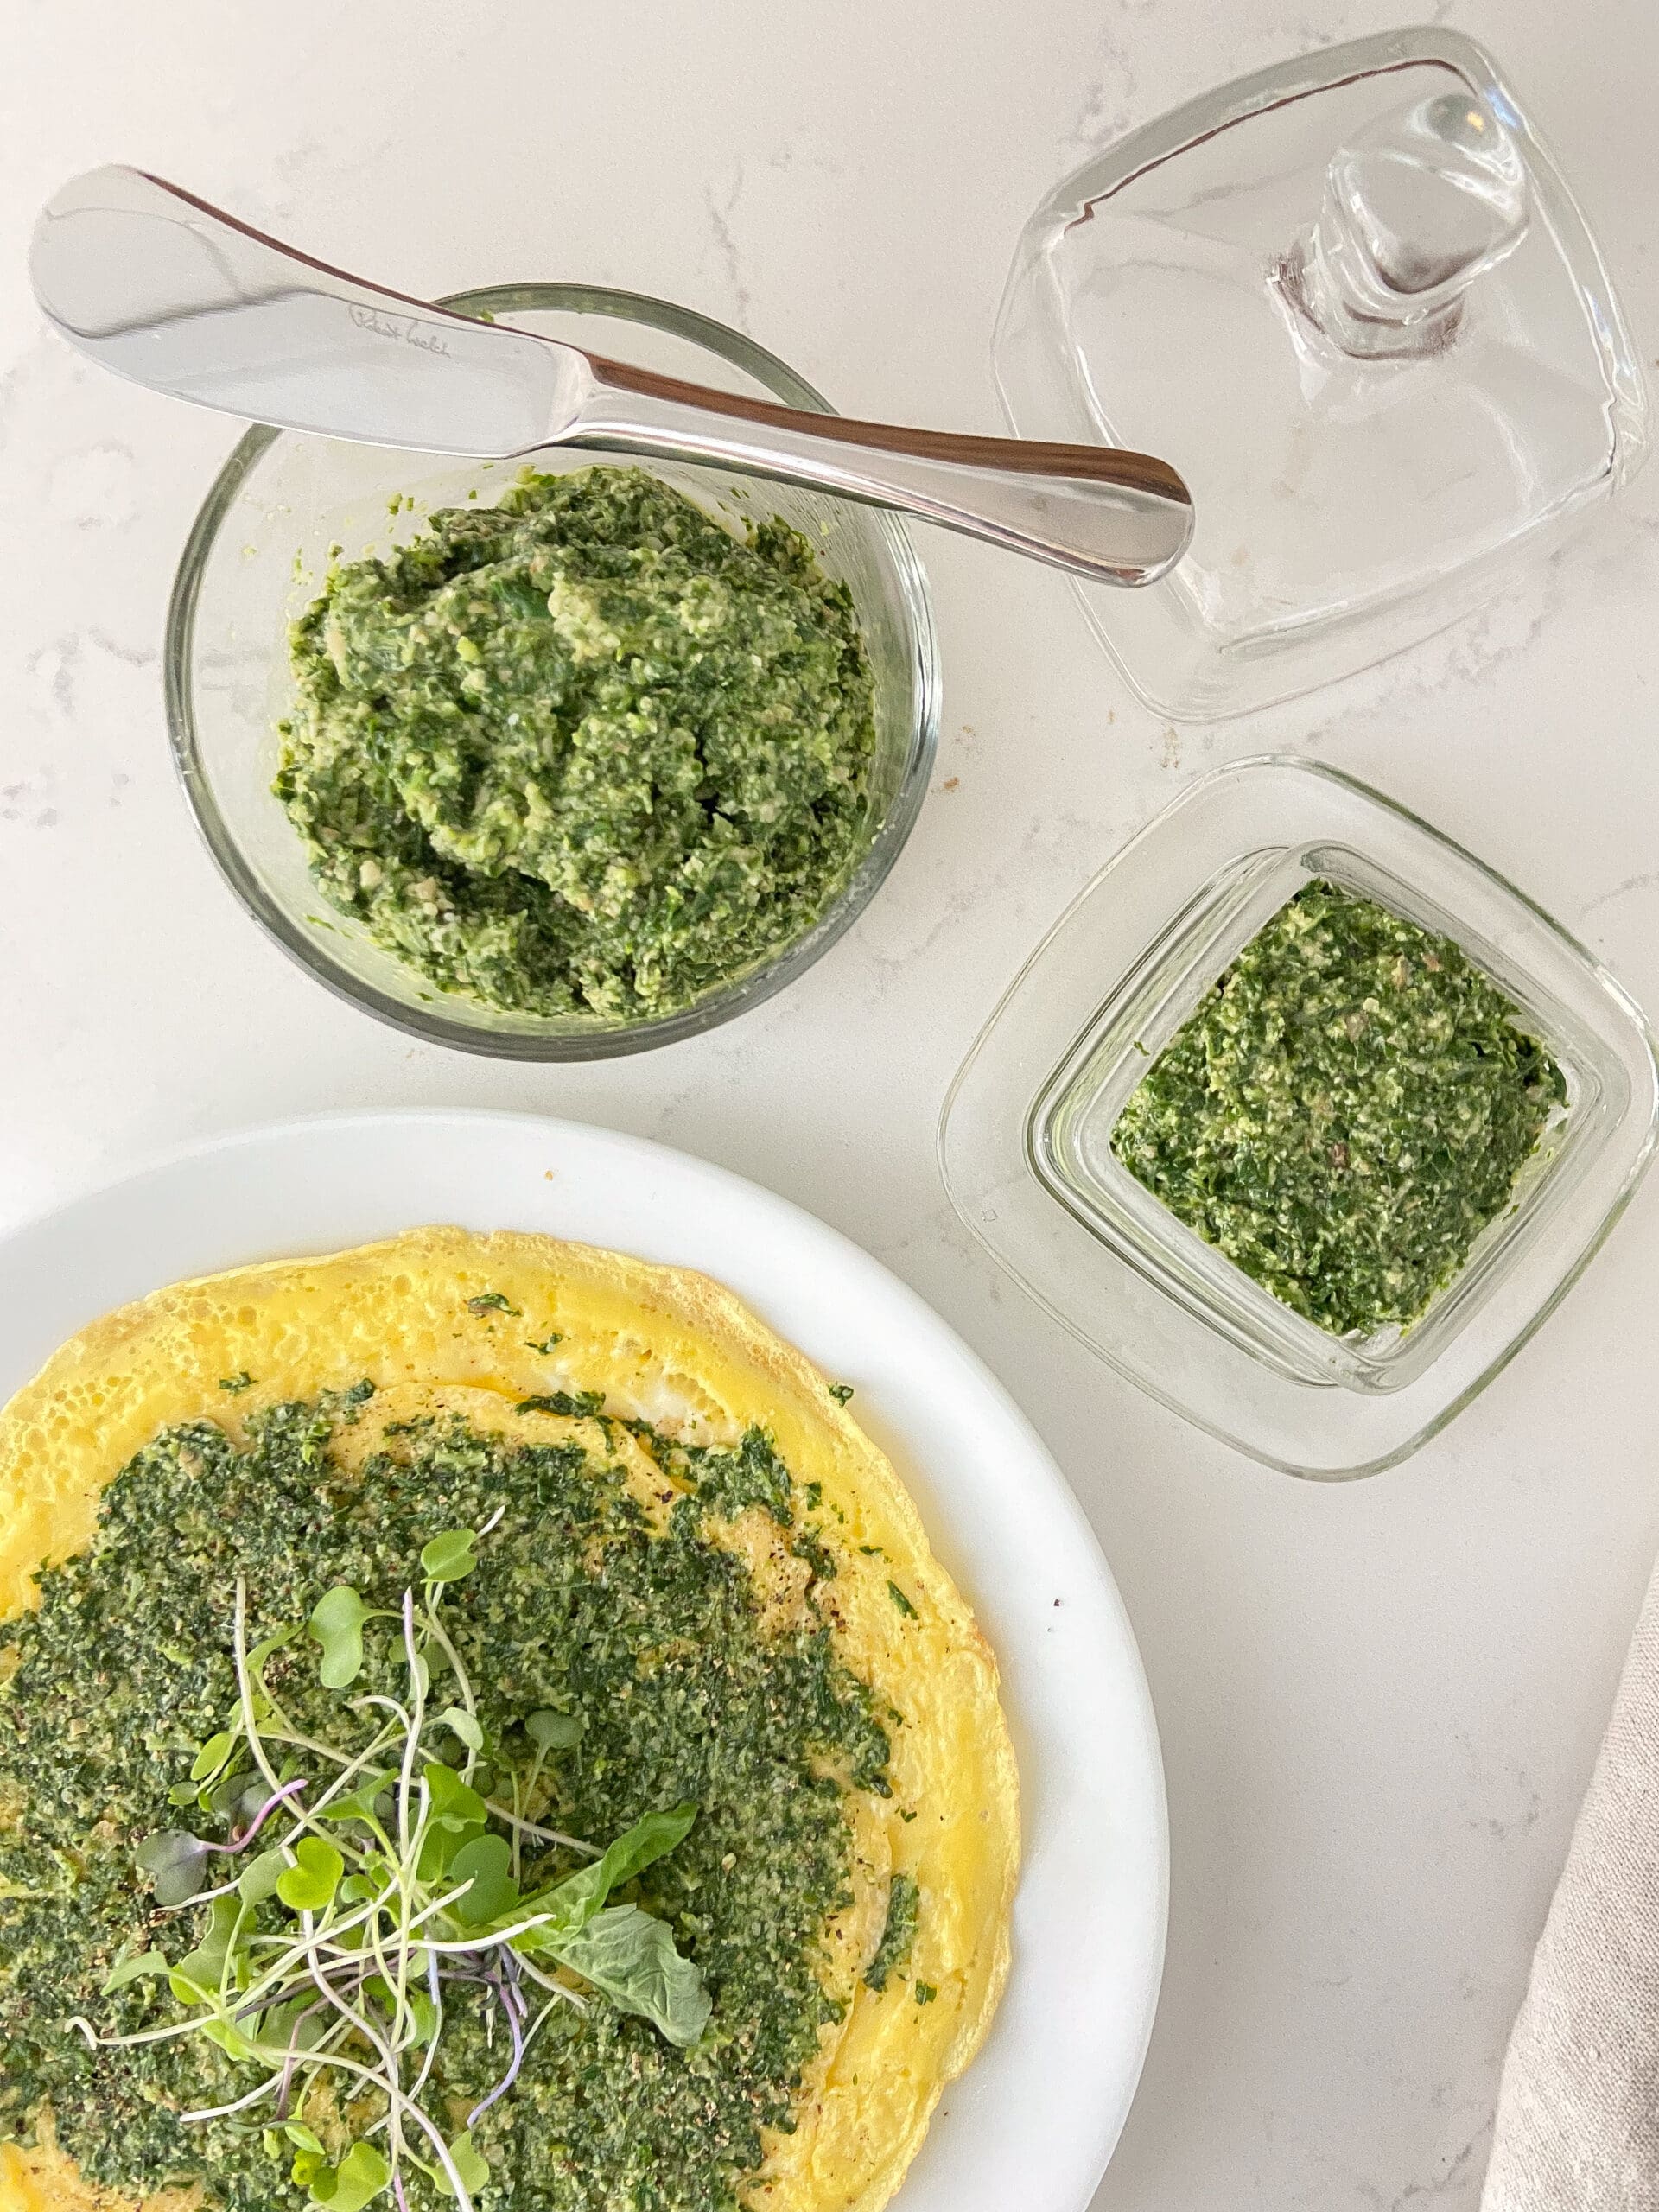 Open-faced omelet on a white place with basil pesto with walnuts spread on top, Prepared pesto in clear glass containers sitting on a white countertop next to the place.